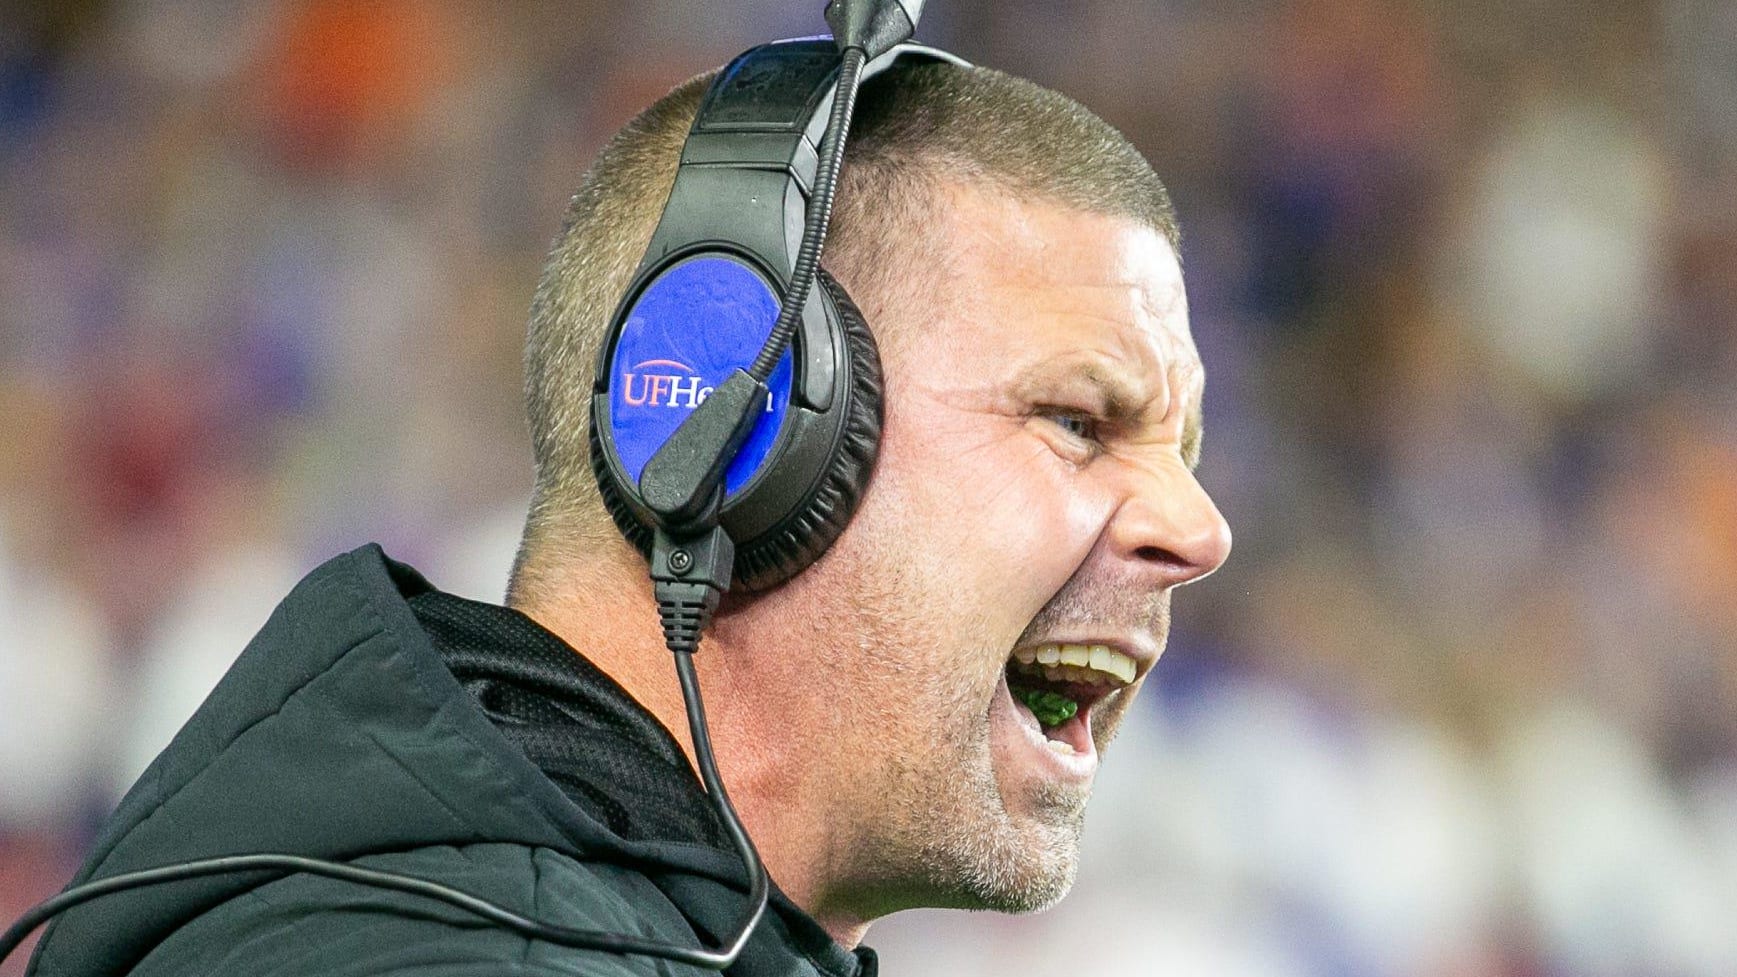 Florida Gators head coach Billy Napier yells at officials during a college football game in the SEC.